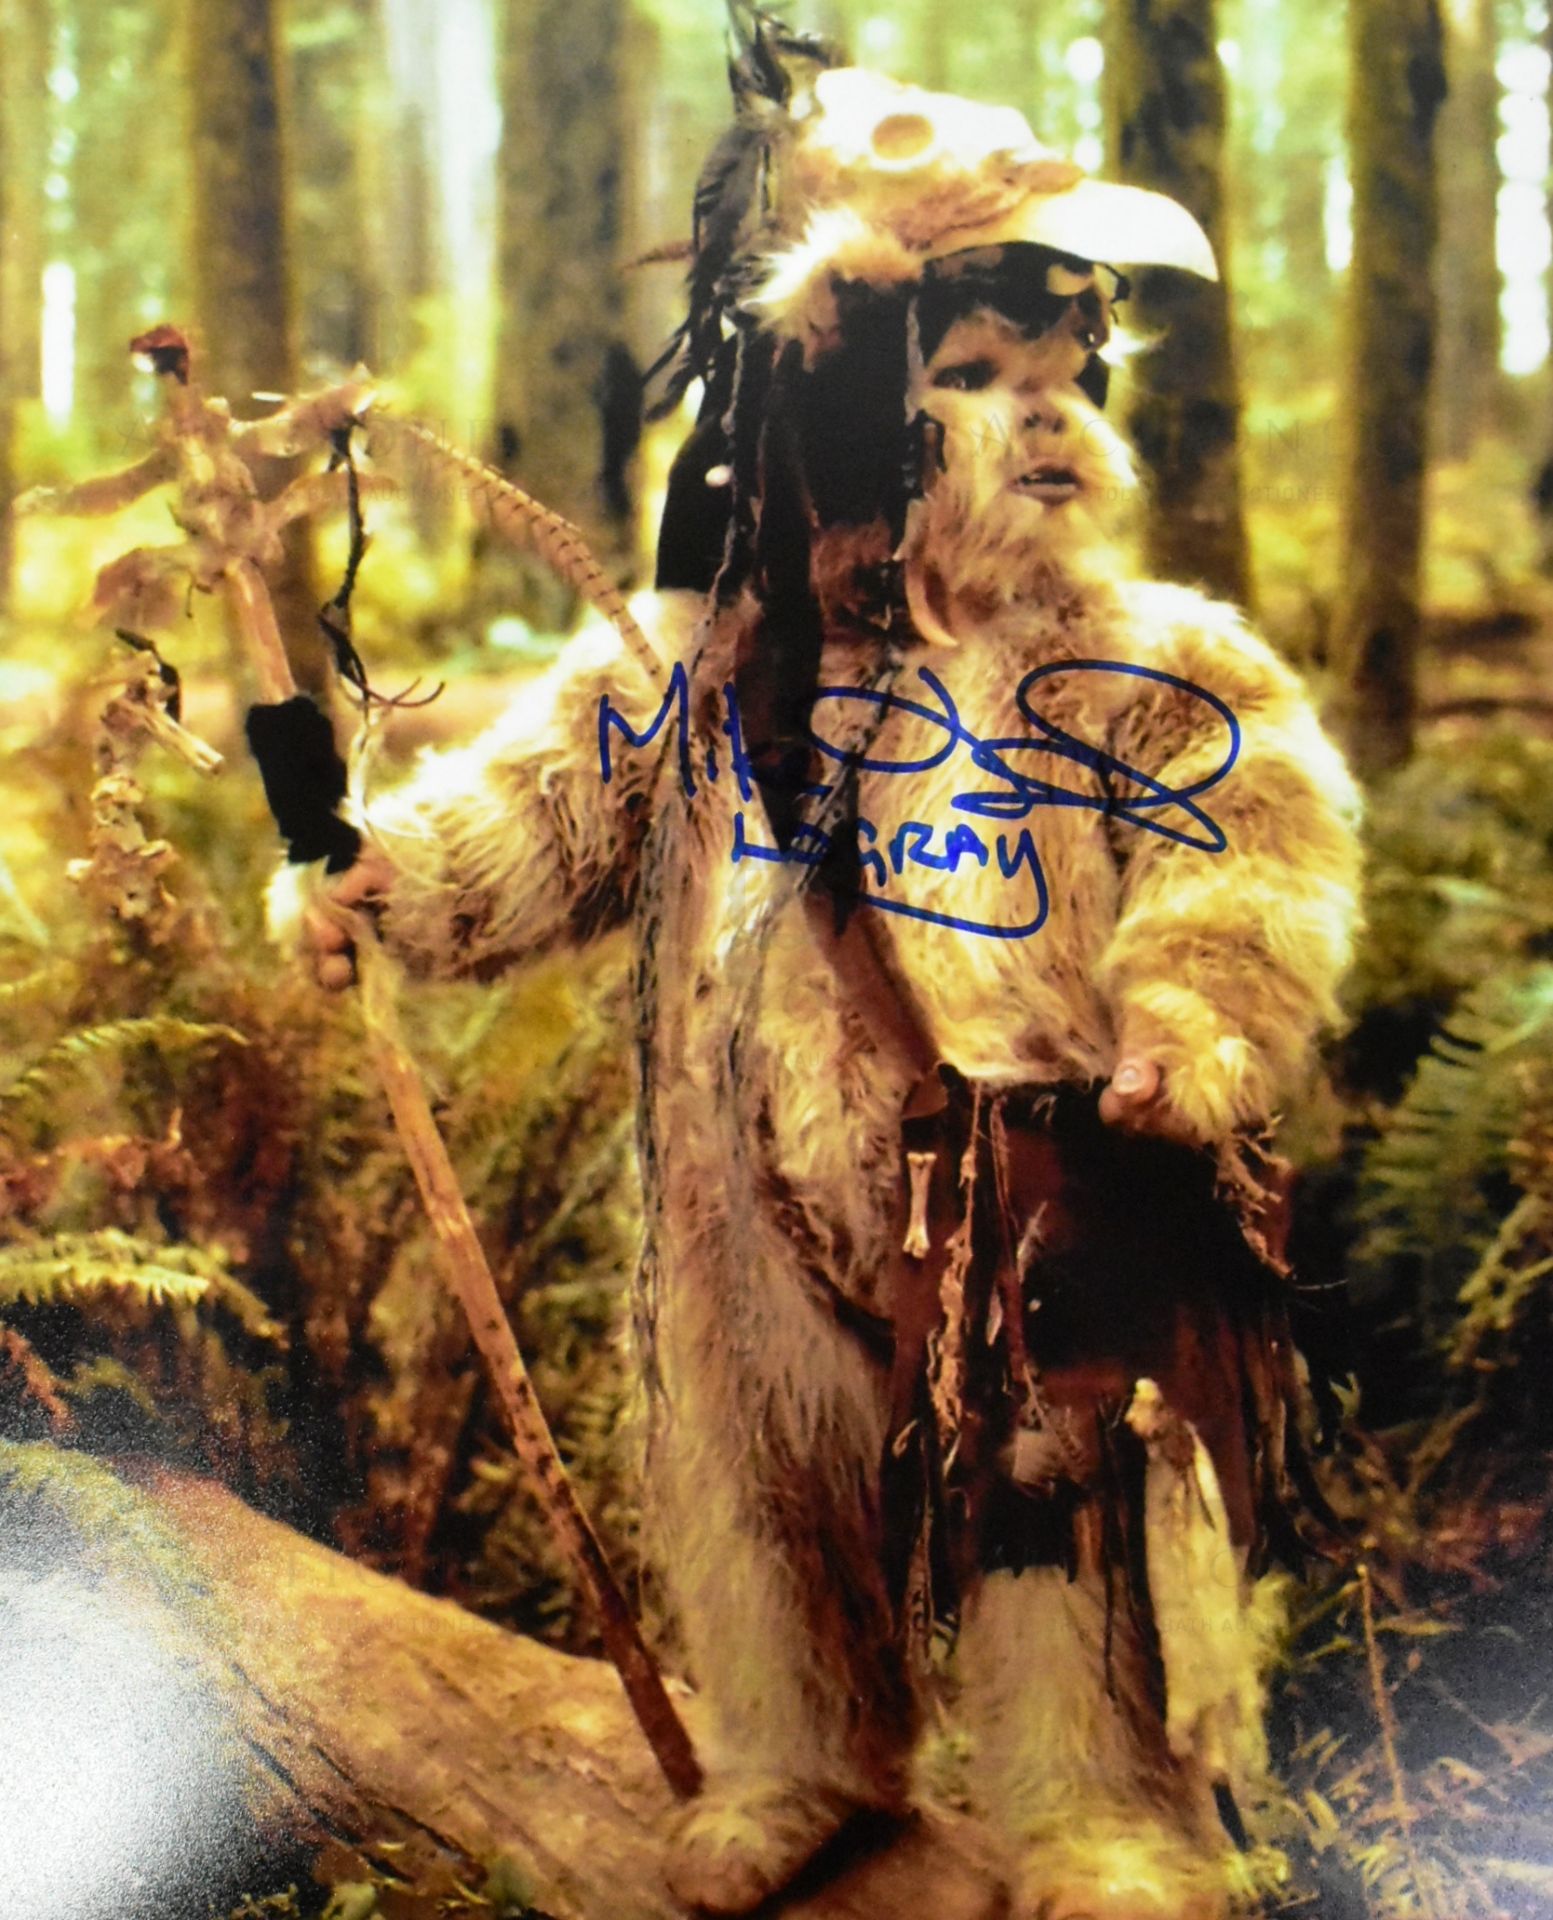 STAR WARS - RETURN OF THE JEDI - COLLECTION OF SIGNED PHOTOS - Image 5 of 5